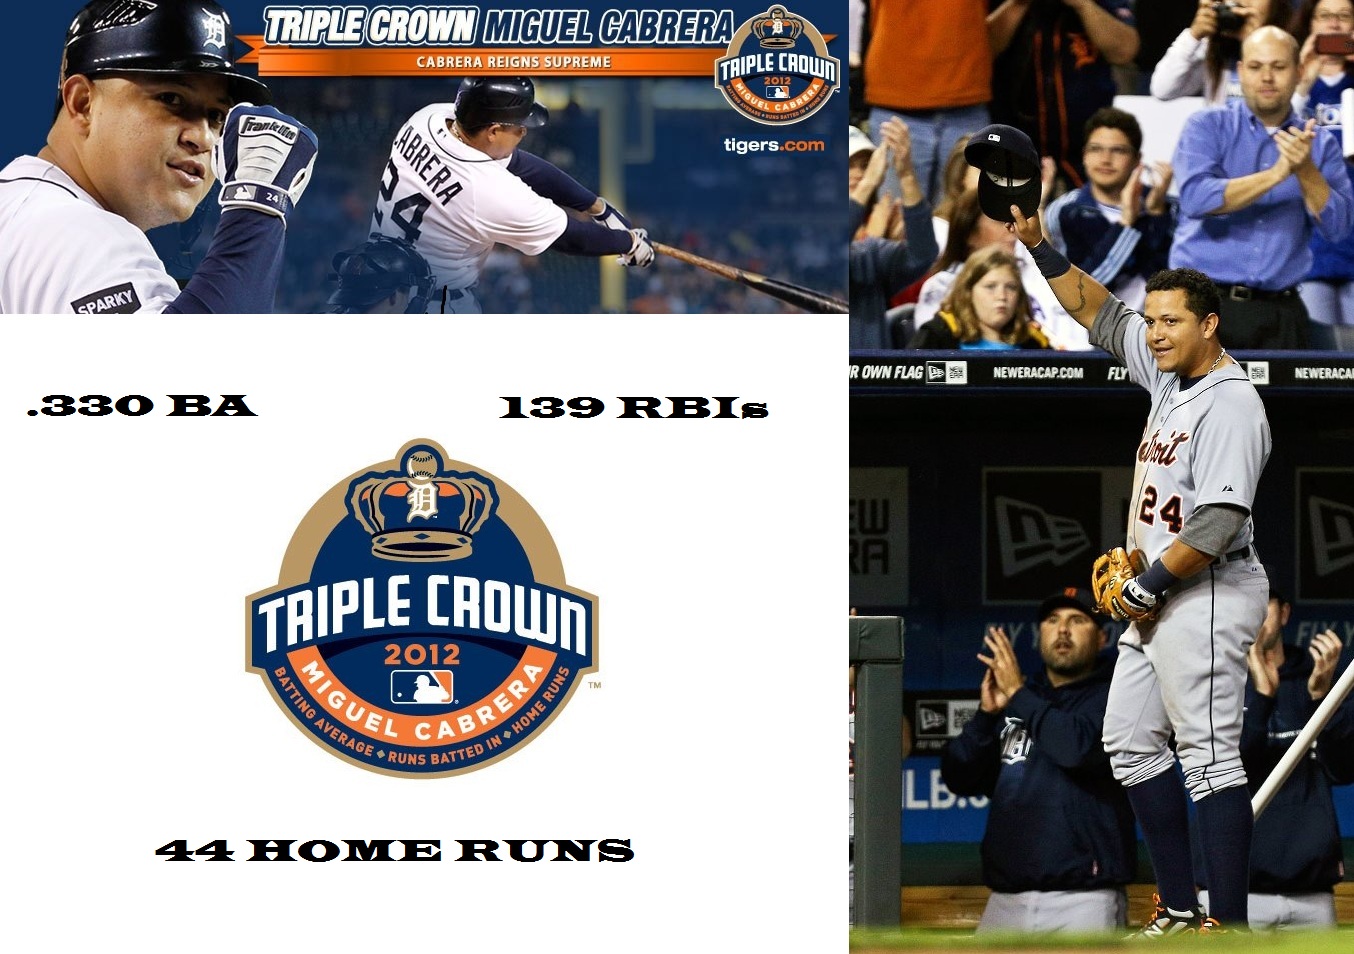 The Sports Cubicle: The Triple Crown: CONGRATULATIONS Miguel Cabrera!